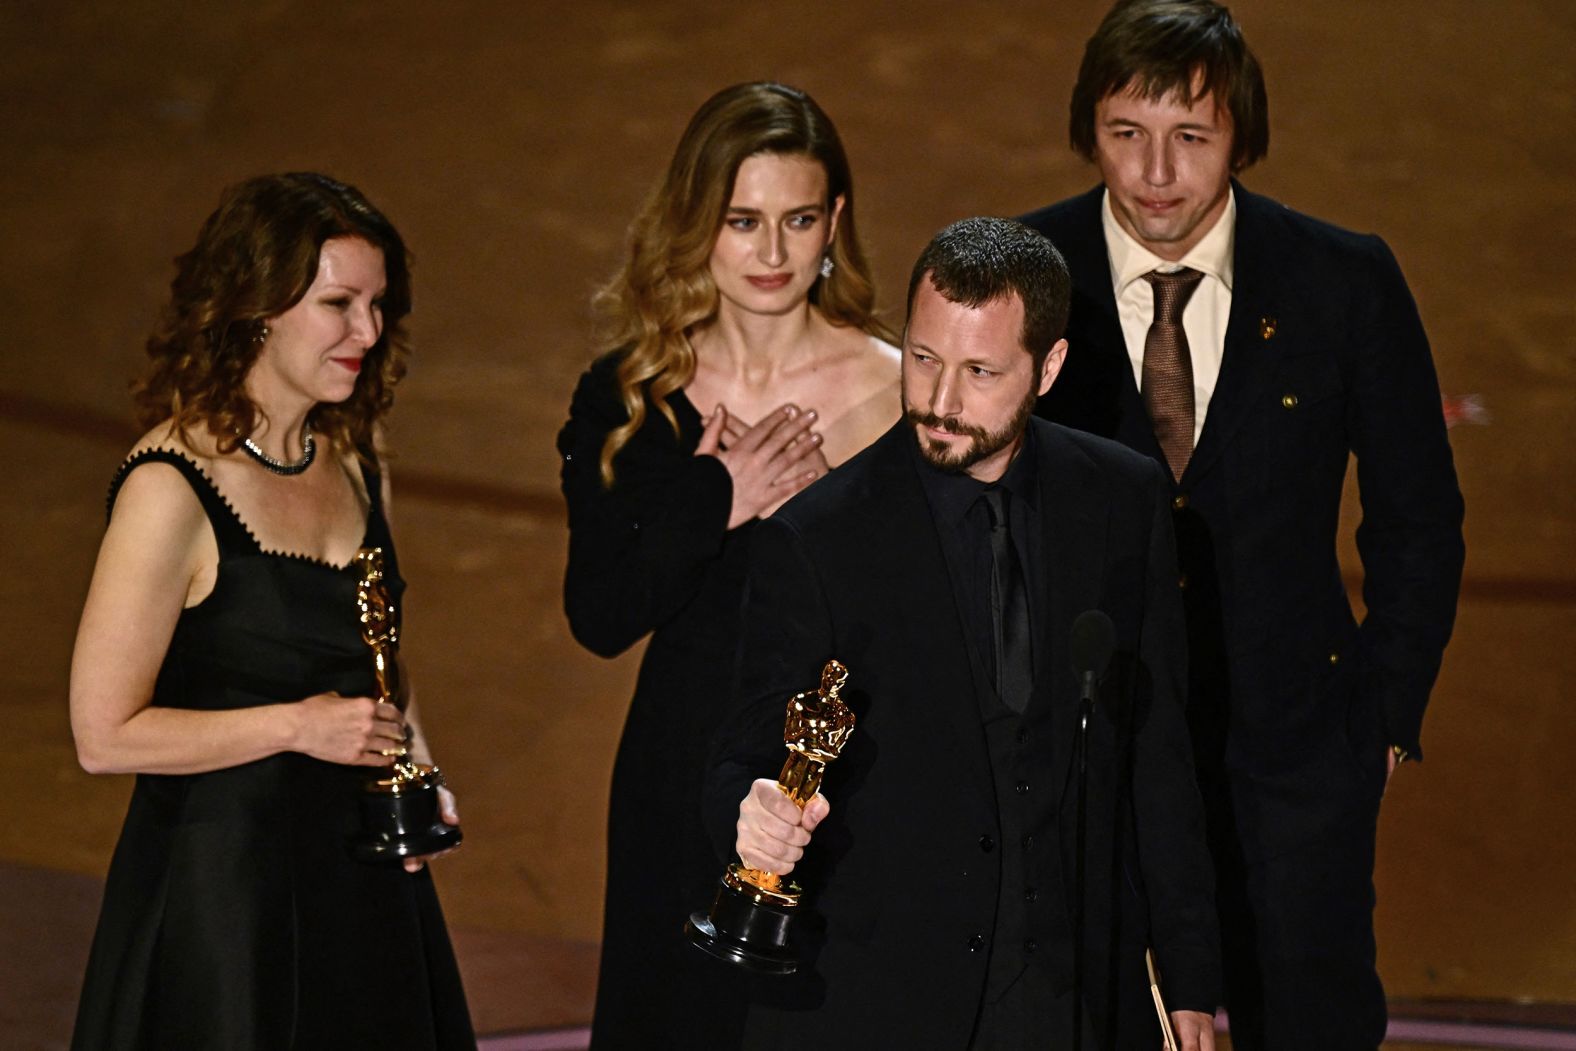 Ukrainian director Mstyslav Chernov accepts the Oscar for best documentary feature film ("20 Days in Mariupol"). "Probably I will be the first director on this stage who will say, 'I wish I never made this film,' " <a href="index.php?page=&url=https%3A%2F%2Fwww.cnn.com%2Fentertainment%2Flive-news%2Foscars-academy-awards-03-10-24%23h_a51bb9d9b0663c1bafad749b433b97d8" target="_blank">Chernov said</a>. "I wish to be able to exchange this (for) Russia never attacking Ukraine, never occupying our cities."